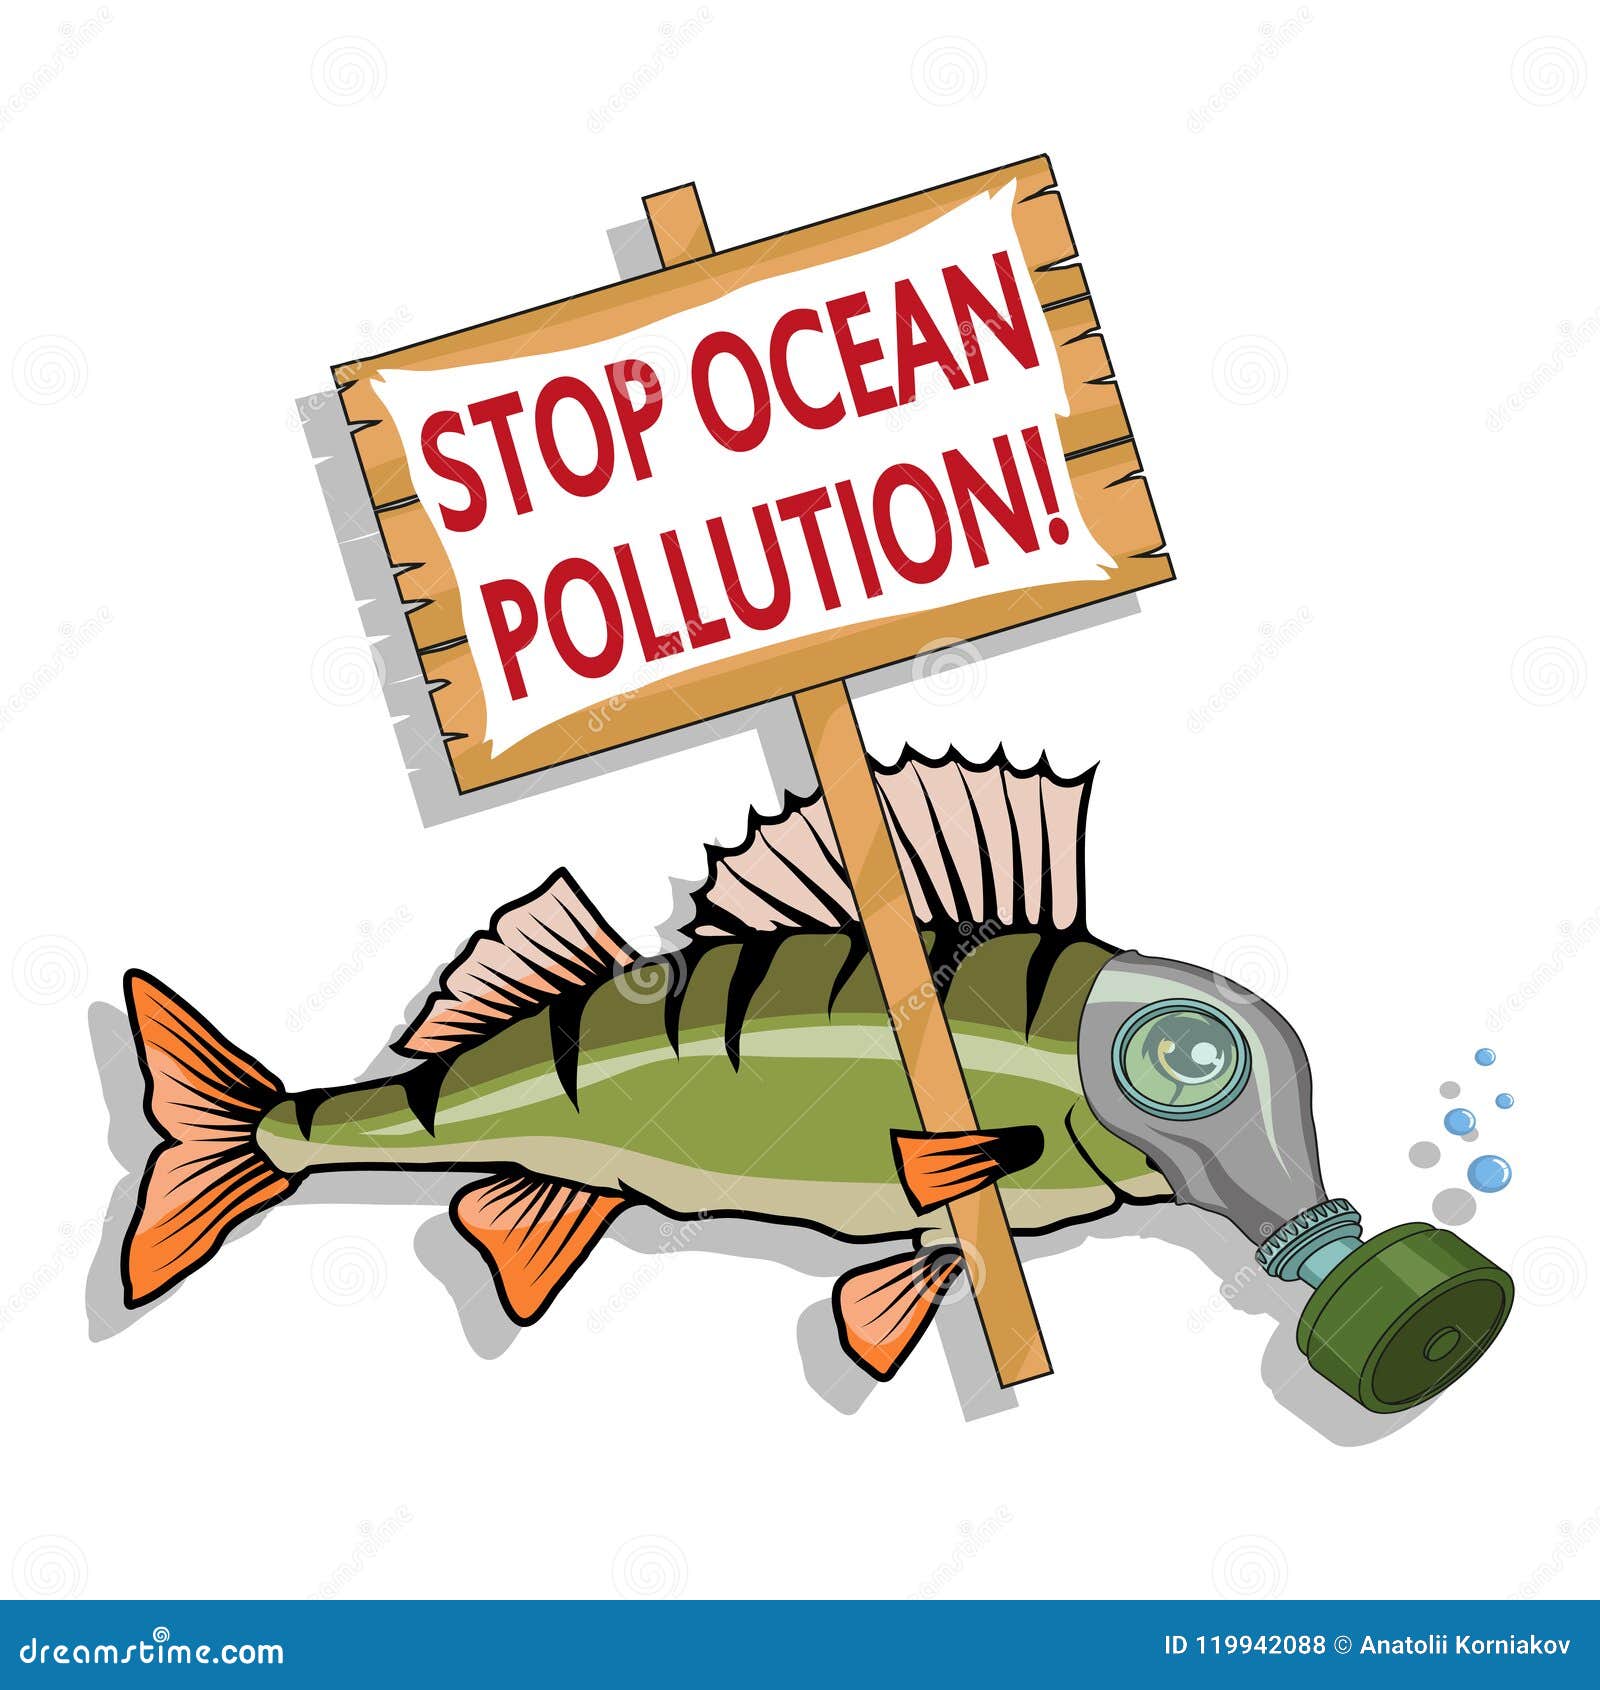 Ocean Pollution Concept. Sea Fish Asks Stop The Pollution Of The Ocean ...